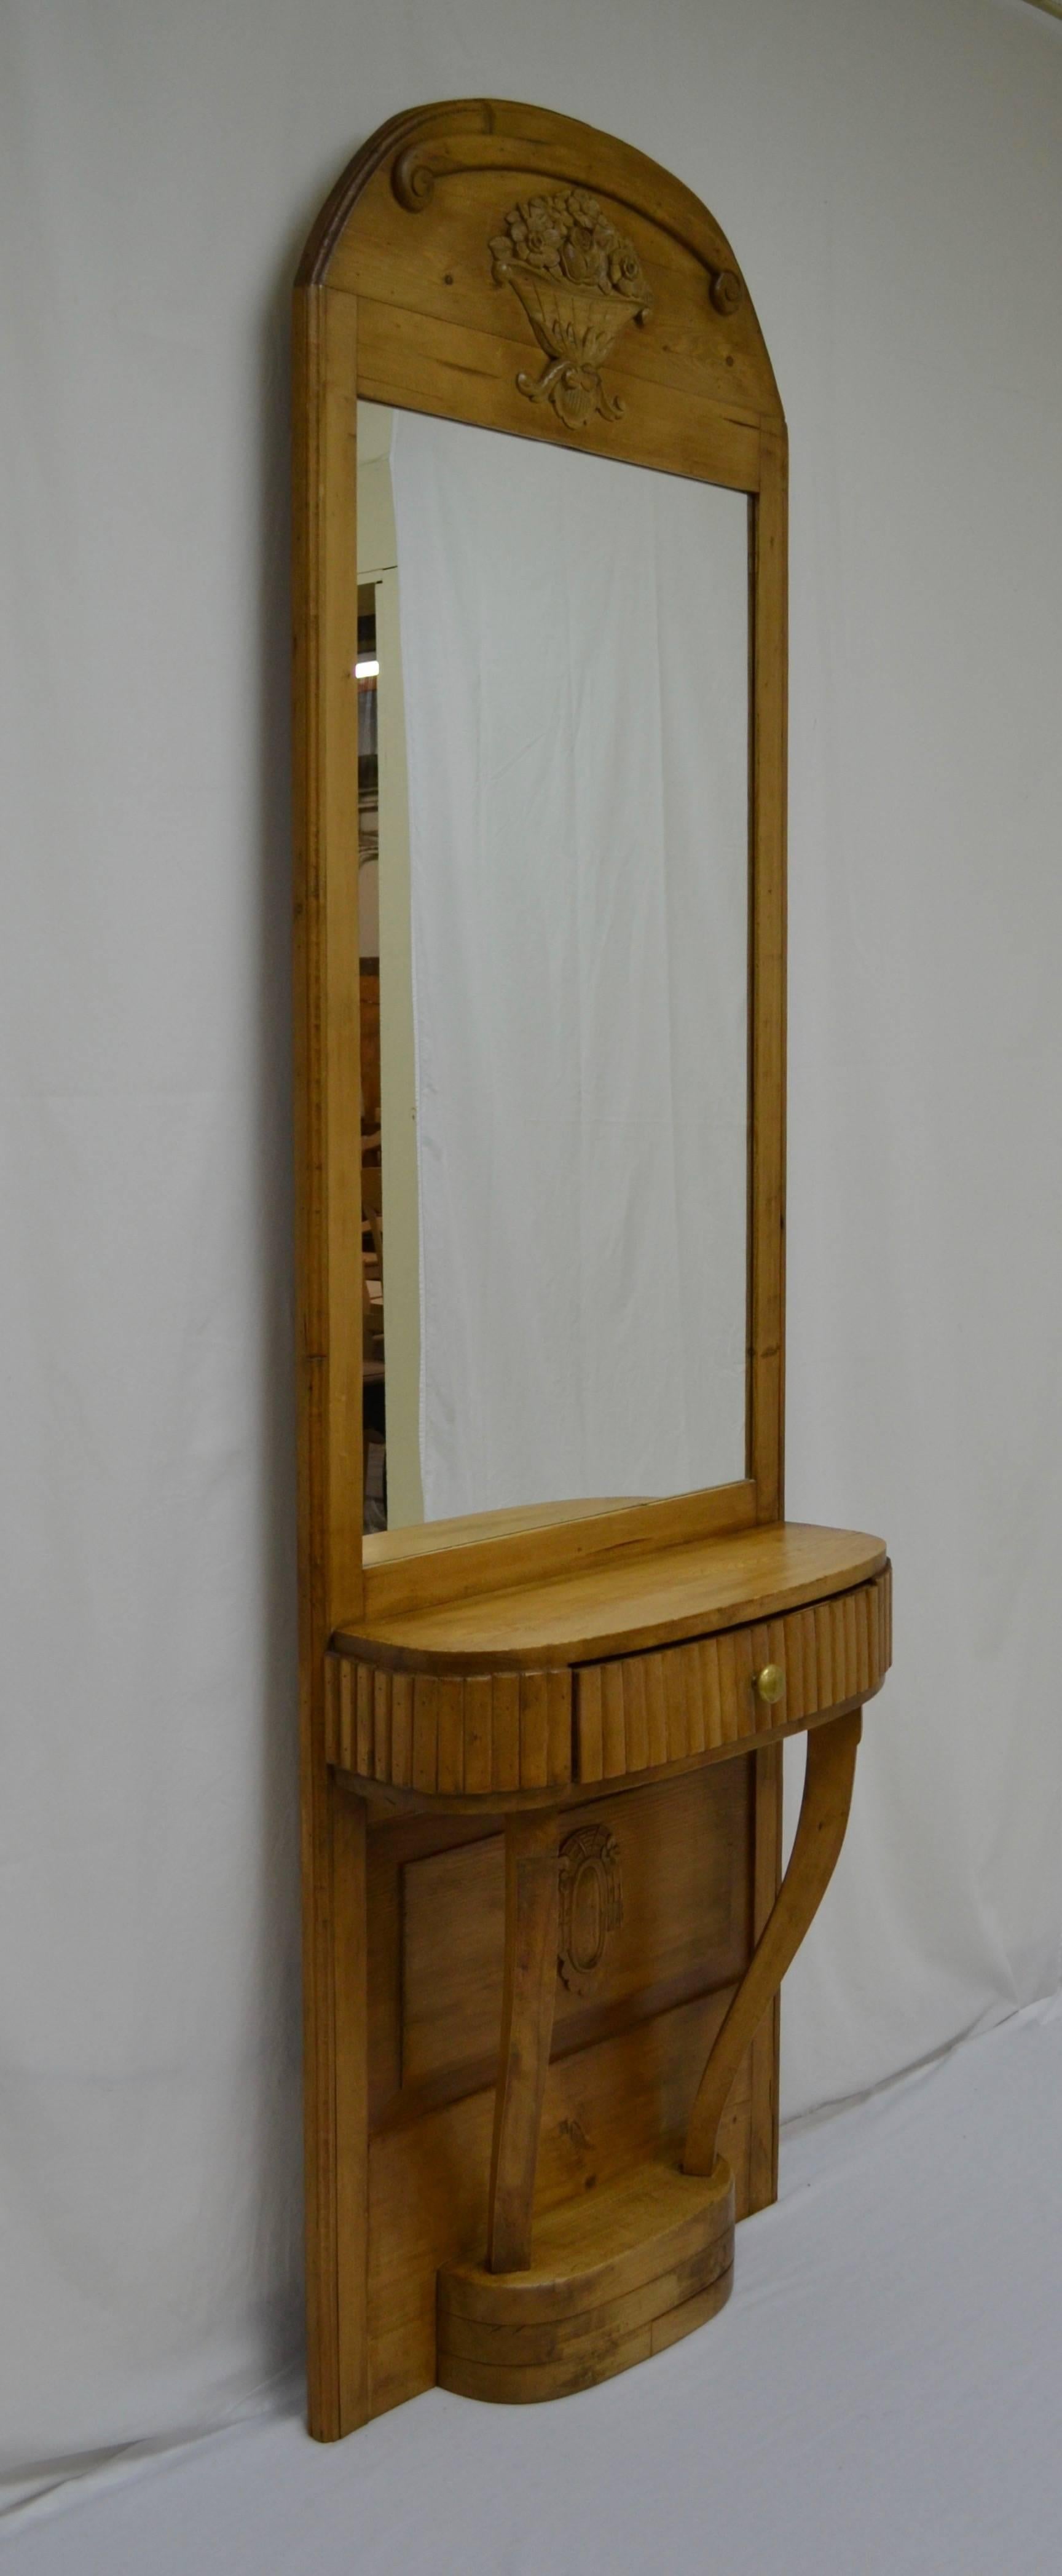 This is a lovely tall and decorative pier or console mirror, ideal for checking your outfit in the hallway before you leave and for putting your keys and gloves away when you get home. The arched top features applied scroll and flower basket